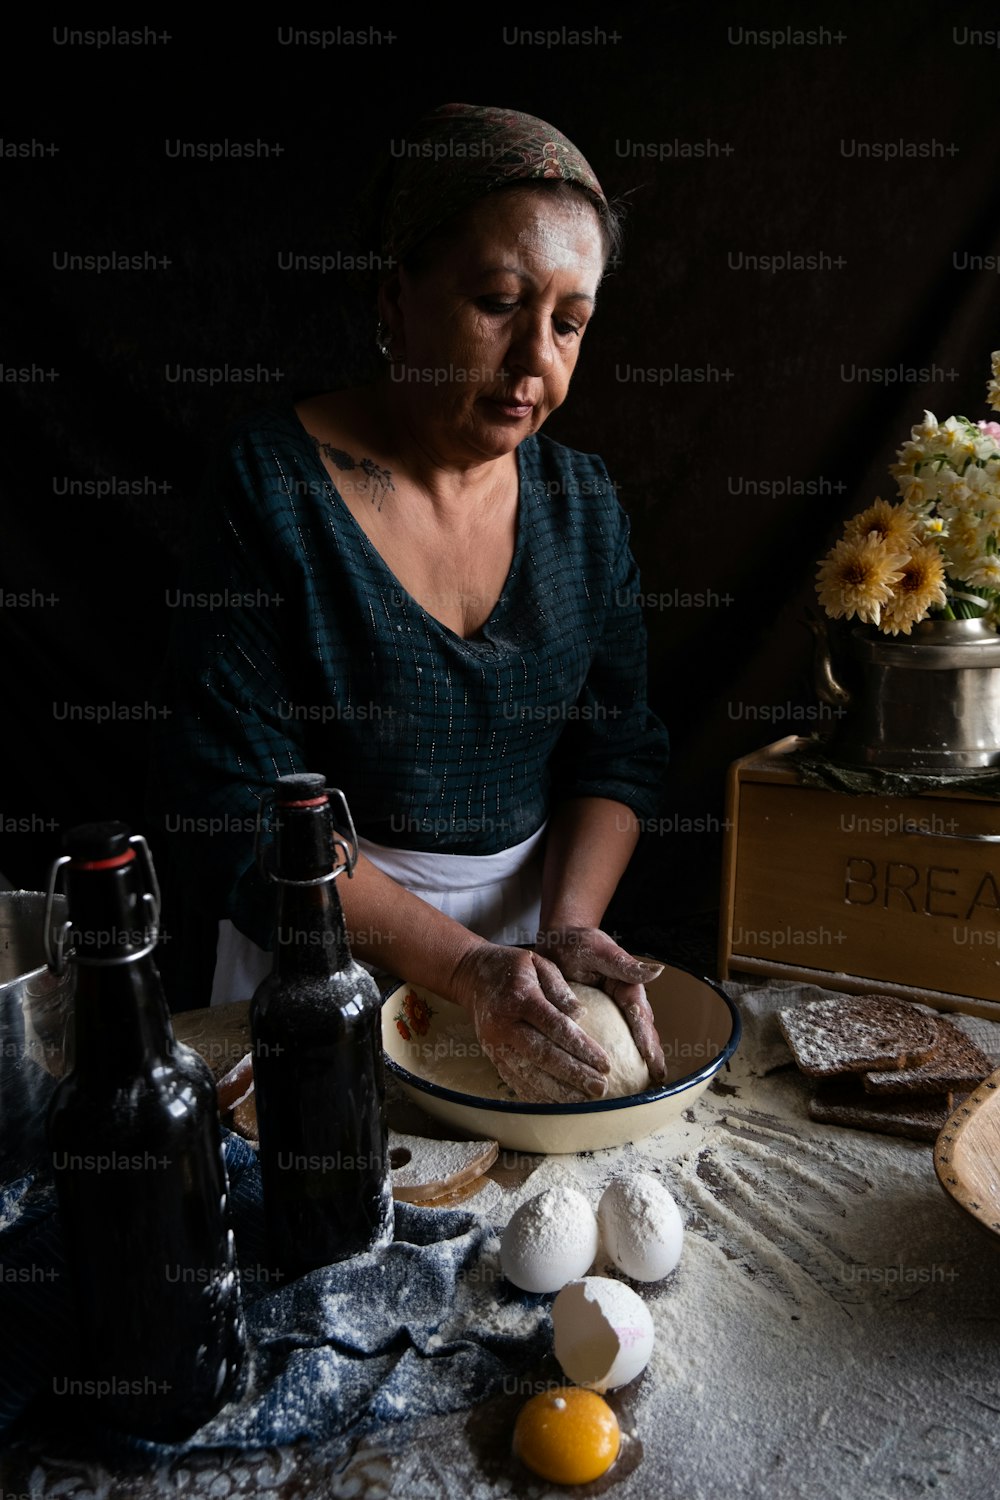 a woman in a black shirt is kneading dough on a table